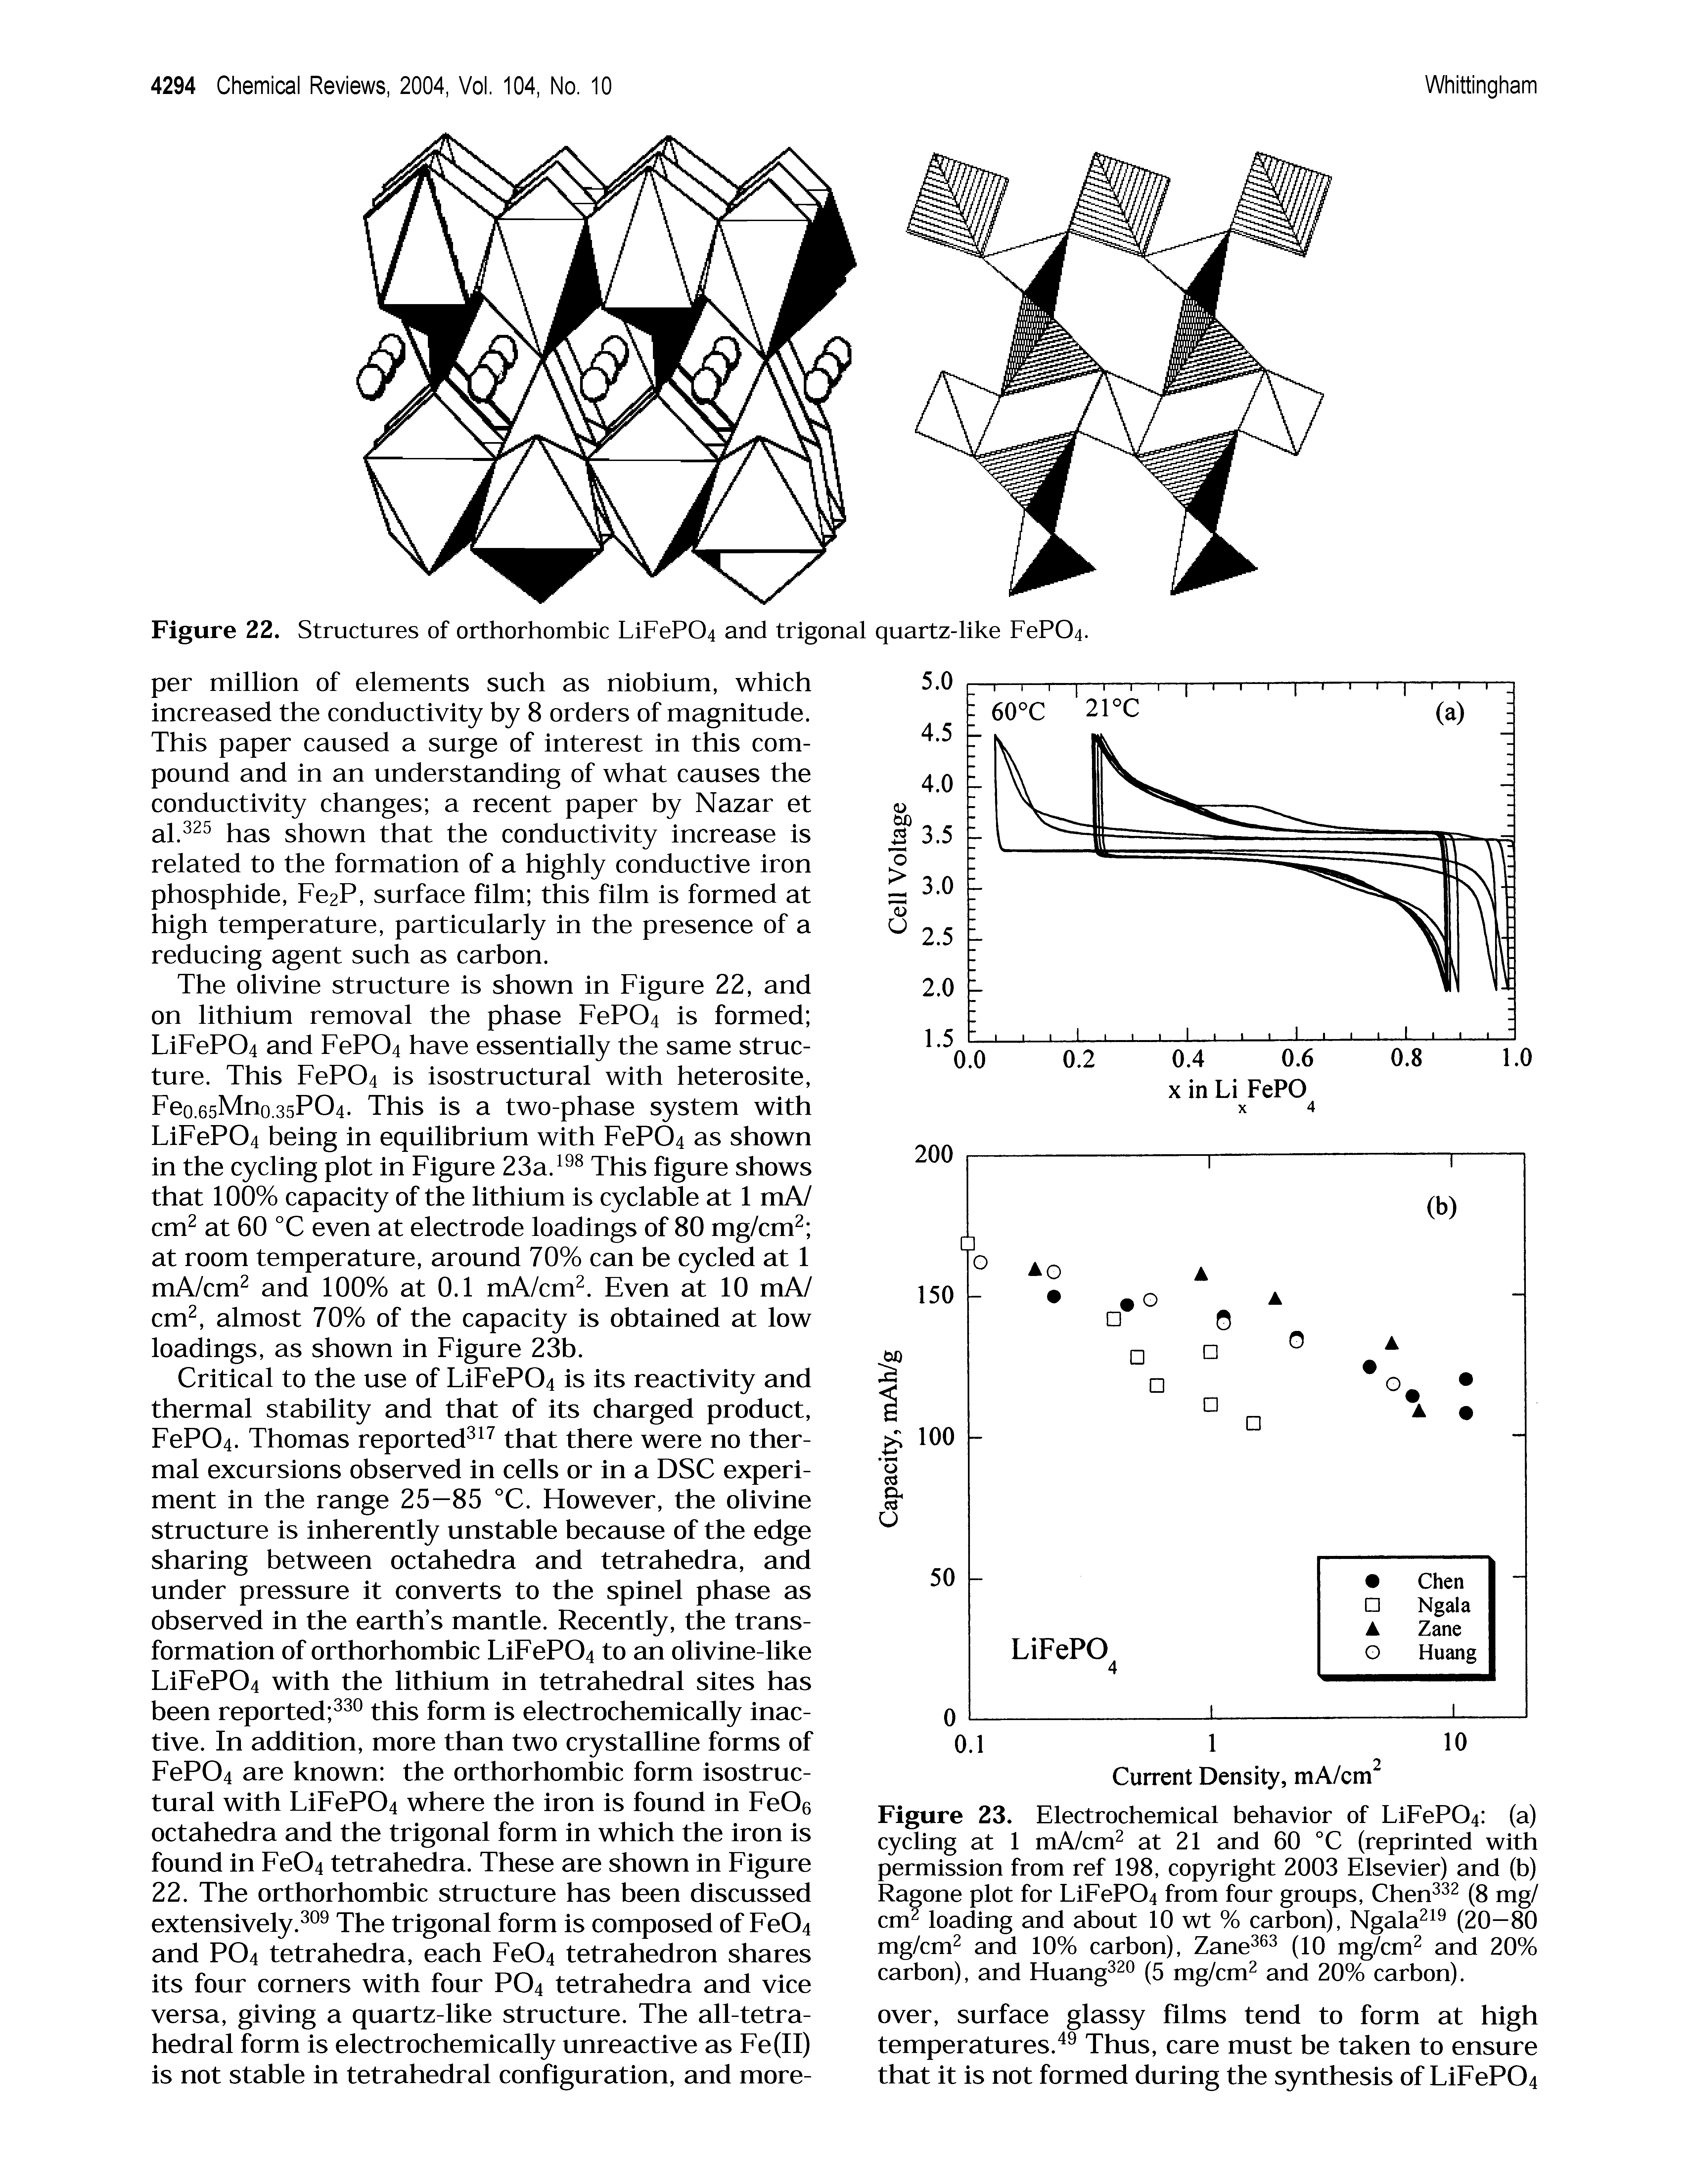 Figure 23. Electrochemical behavior of LiFeP04 (a) cycling at 1 mA/cm at 21 and 60 °C (reprinted with permission from ref 198, copyright 2003 Elsevier) and (b) Ragone plot for LiEeP04 from four groups, Chen (8 mg/ cm loading and about 10 wt % carbon), Ngala (20—80 mg/cm and 10% carbon), Zane (10 mg/cm and 20% carbon), and Huang (5 mg/cm and 20% carbon).